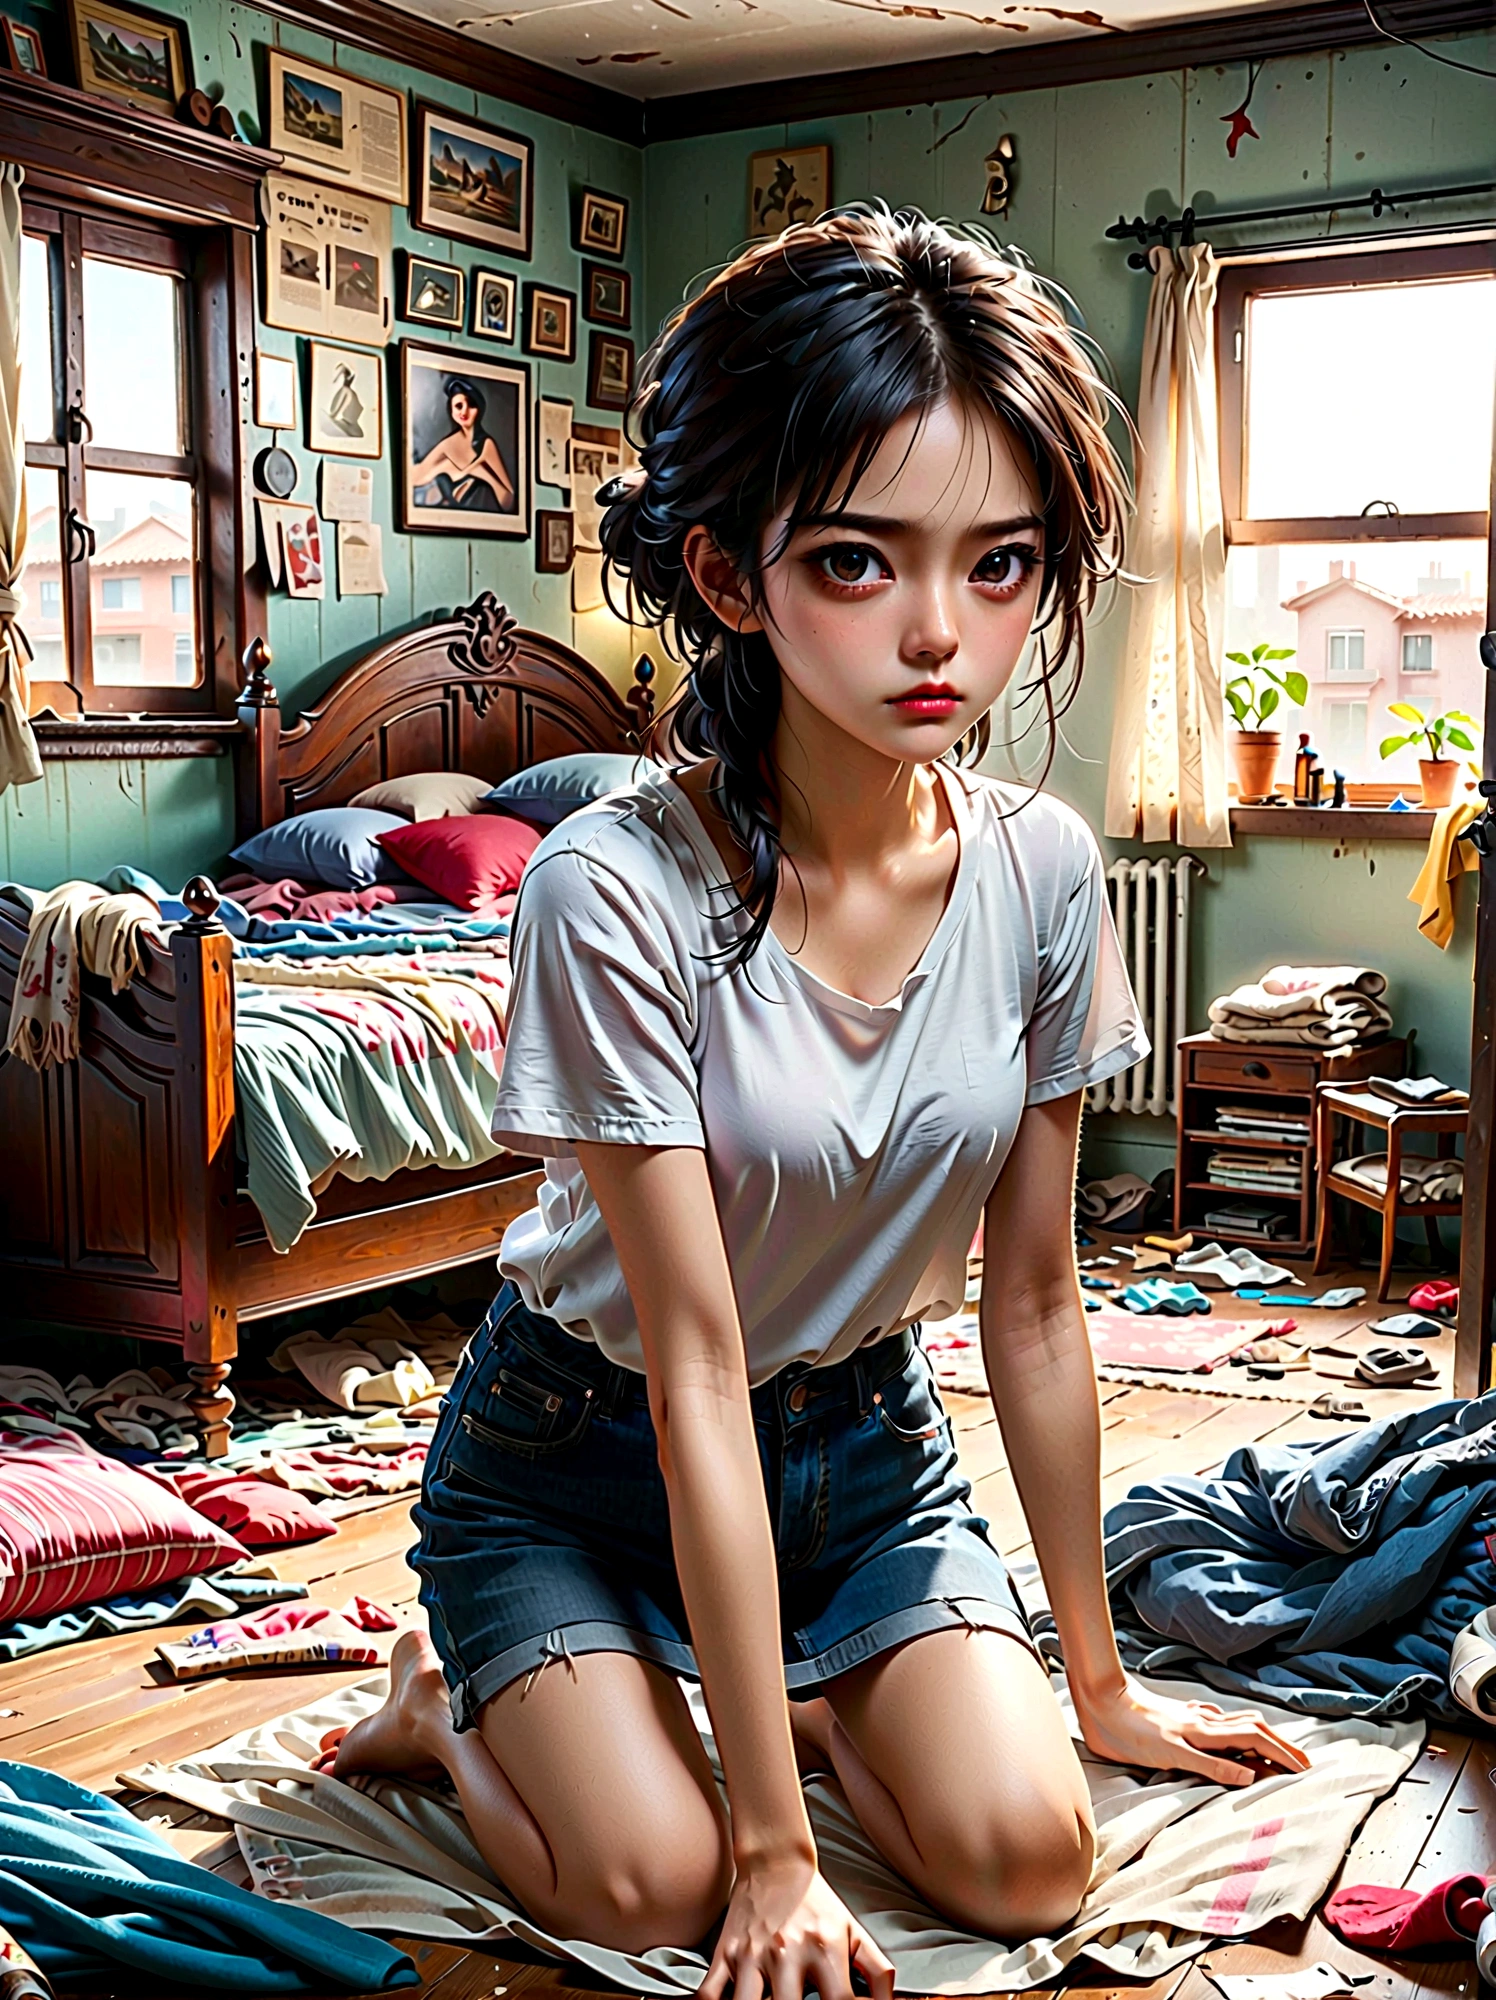 (a young girl with a disgusted expression), (Disgusted look:1.5), Messy hair, Sweating, Cleaning a messy room, dust, cobwebs, A bunch of clothes, Unmade bed, garbage on the floor, Realistic details, Realistic shadows, Realistic lighting, Natural light, Super Fine, Sharp focus, Physically Based Rendering, Extremely detailed description, major, Vivid colors